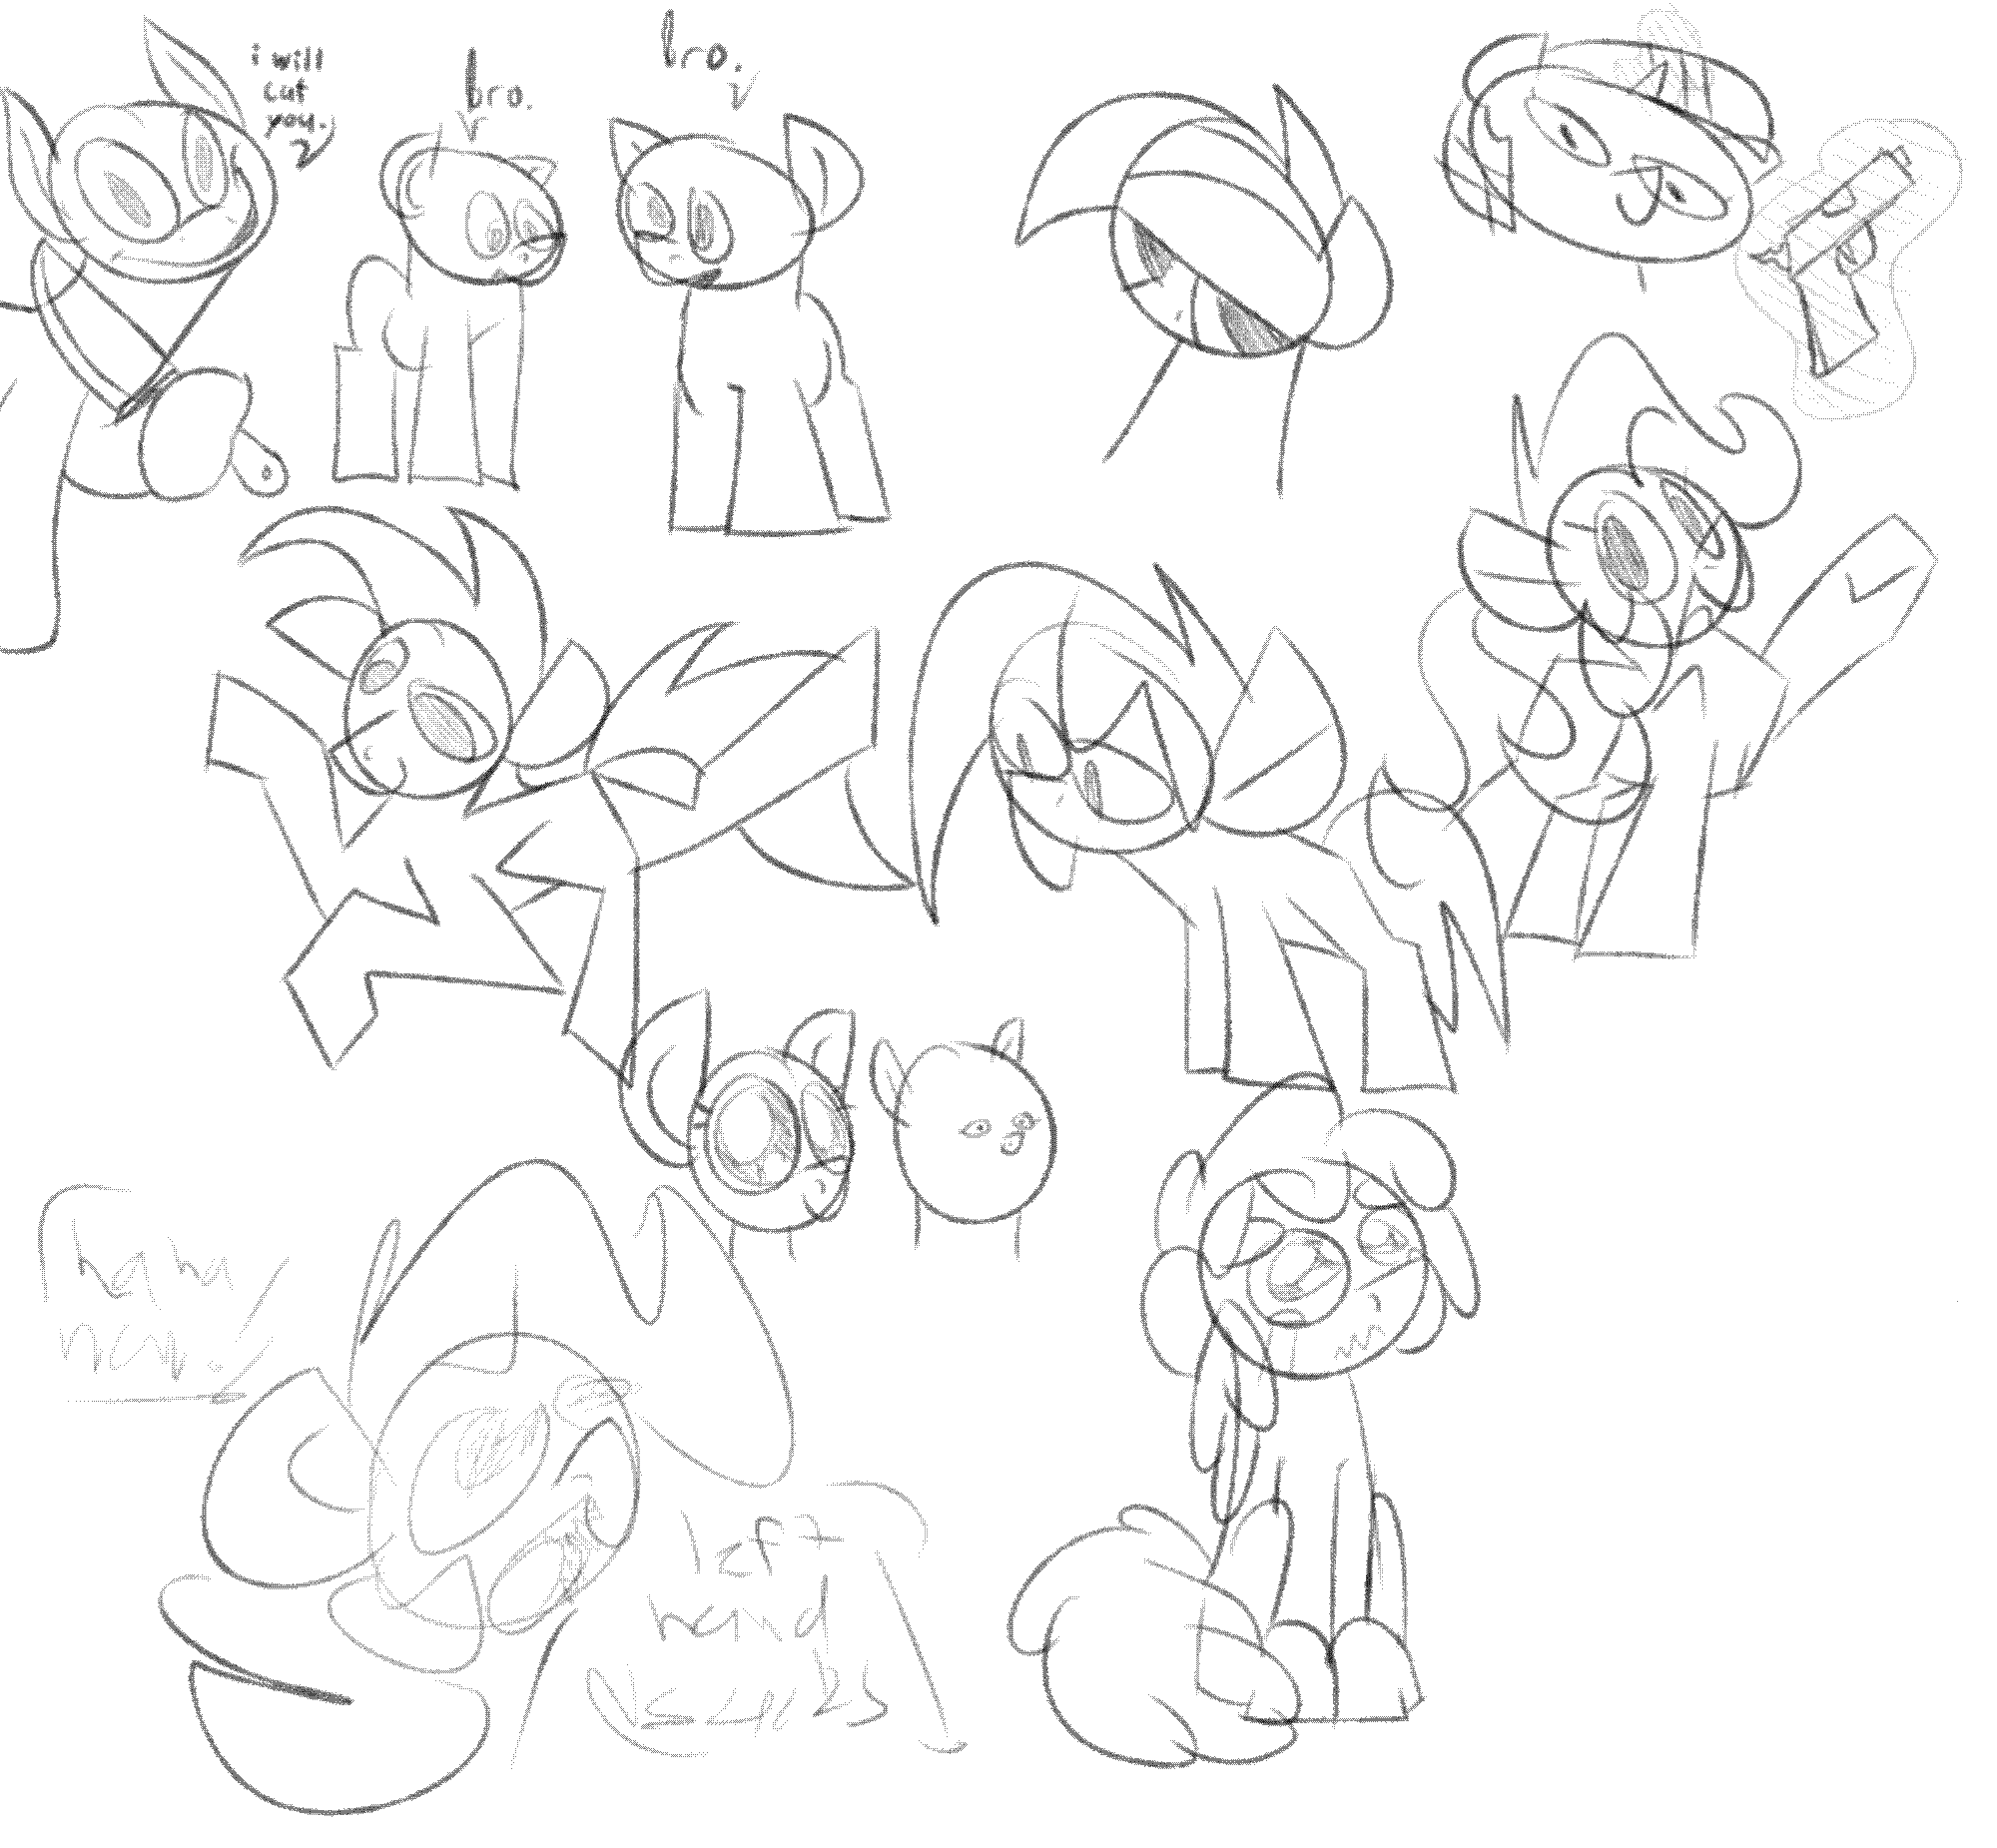 whole lotta sloopy loose doodles